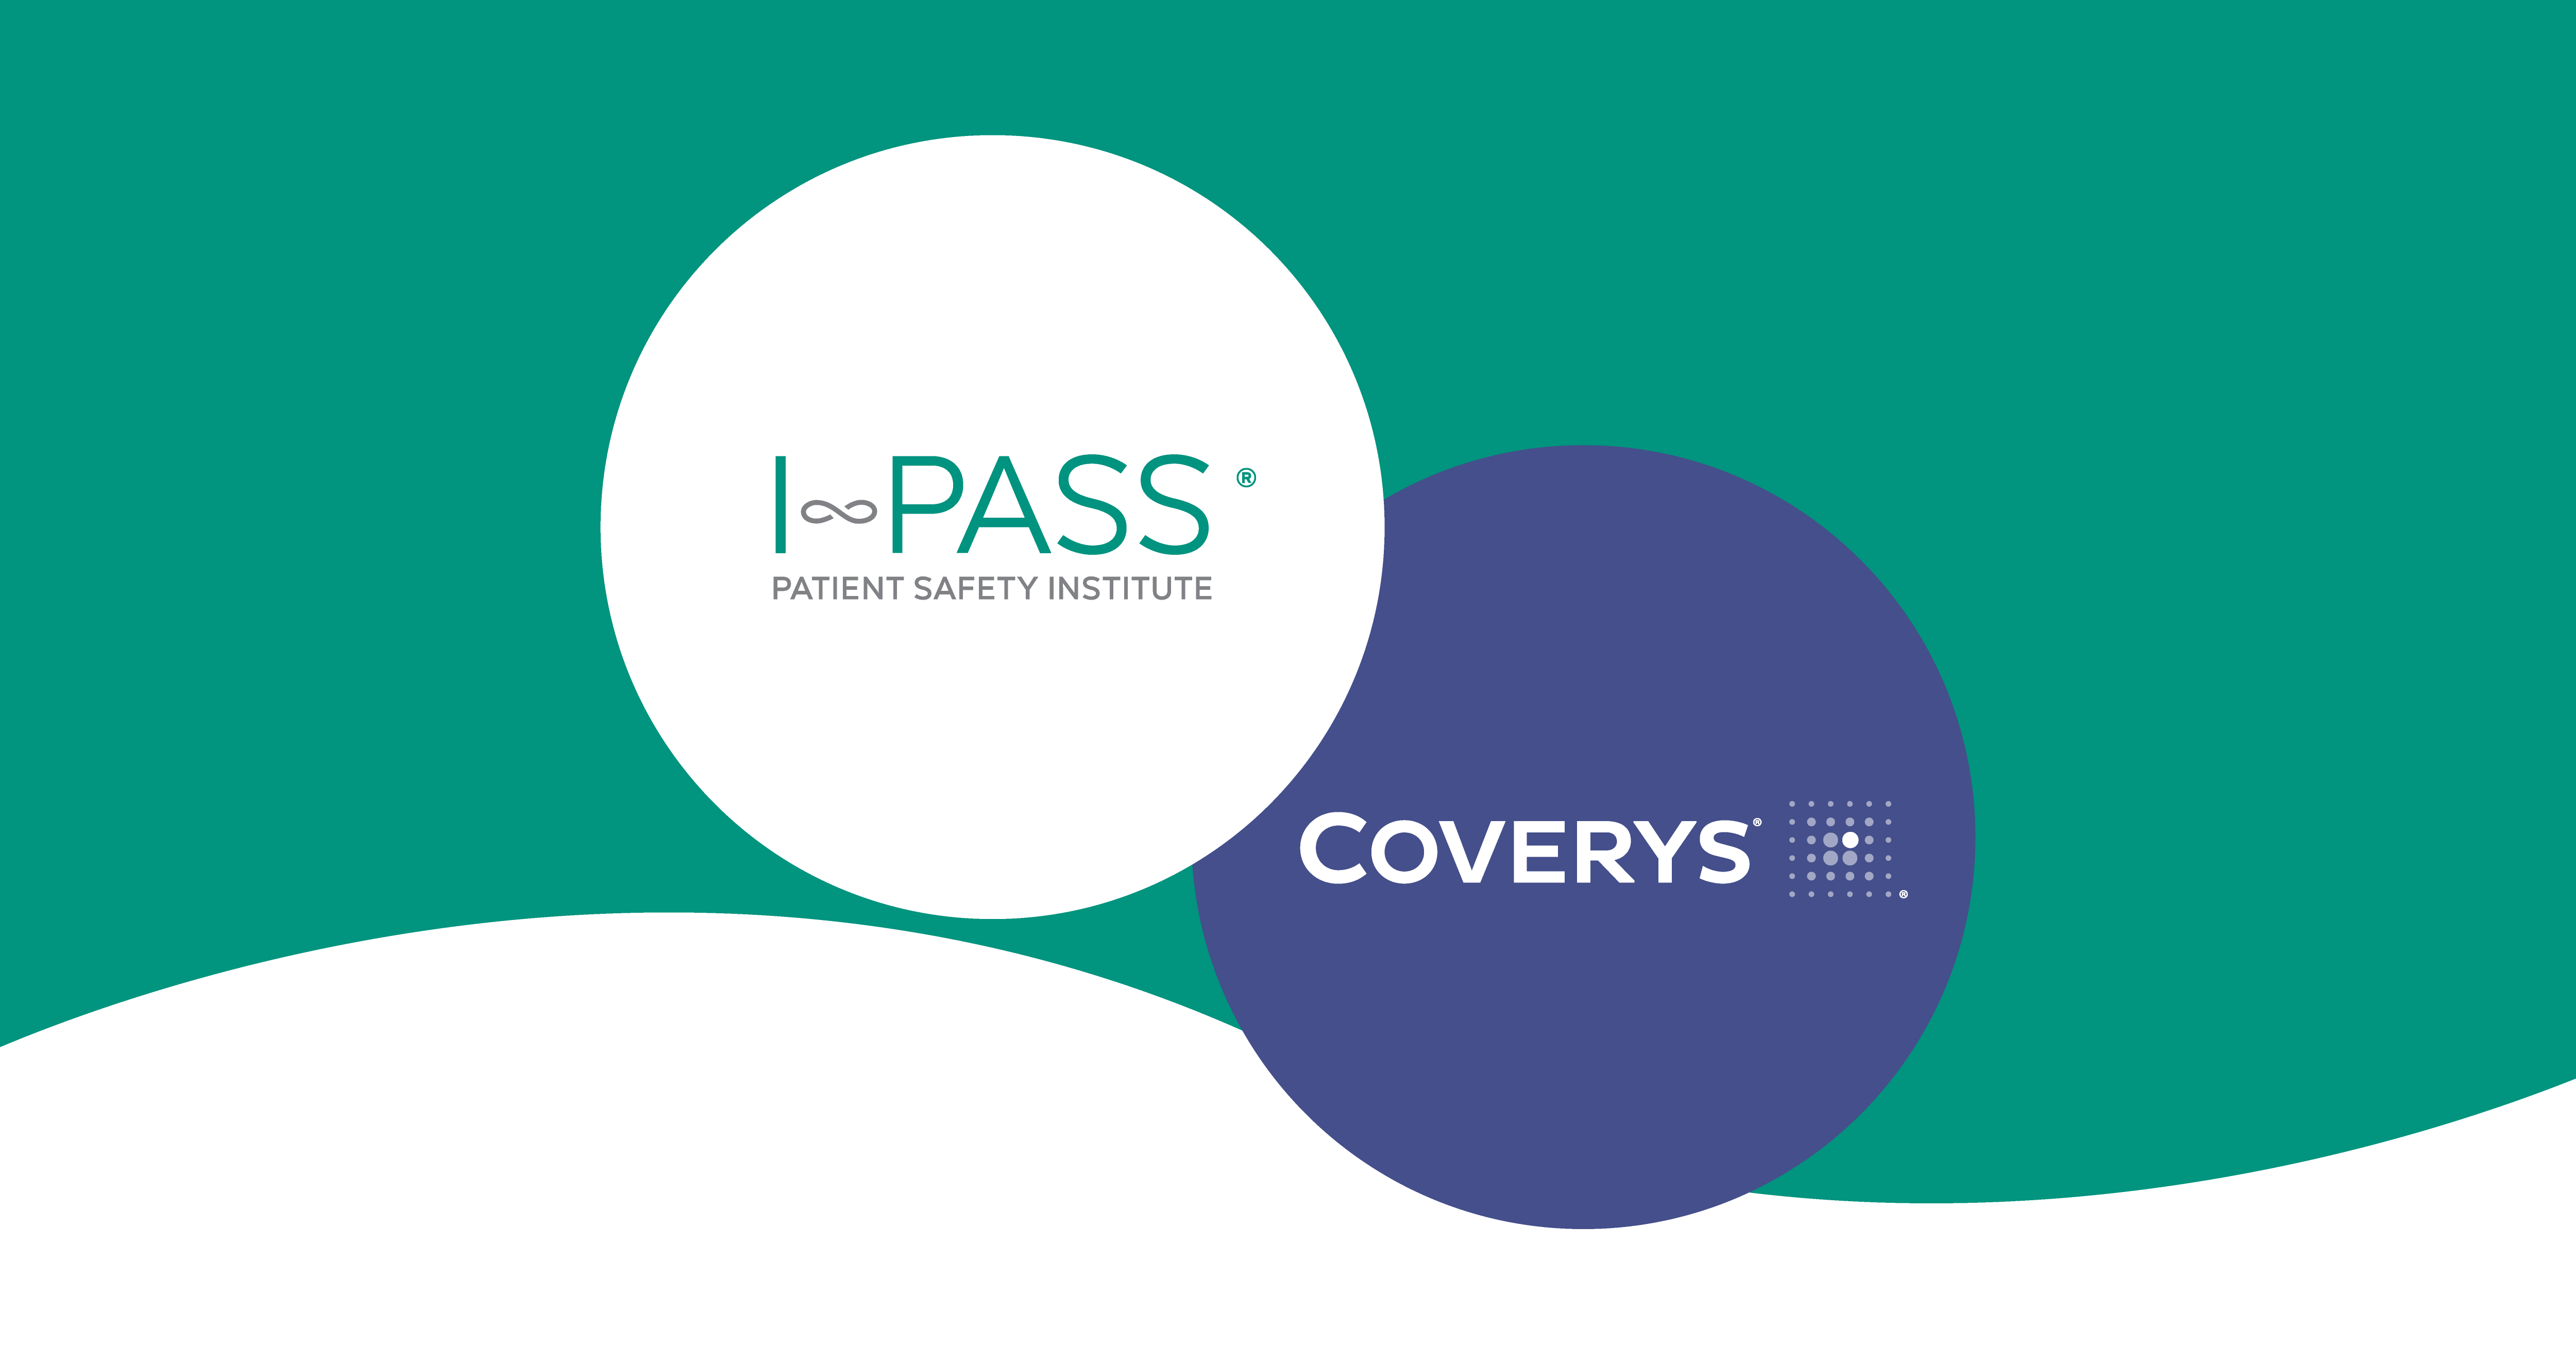 I-PASS Institute and Coverys Collaborate to Bring Patient Safety Solution to Hospitals Nationwide